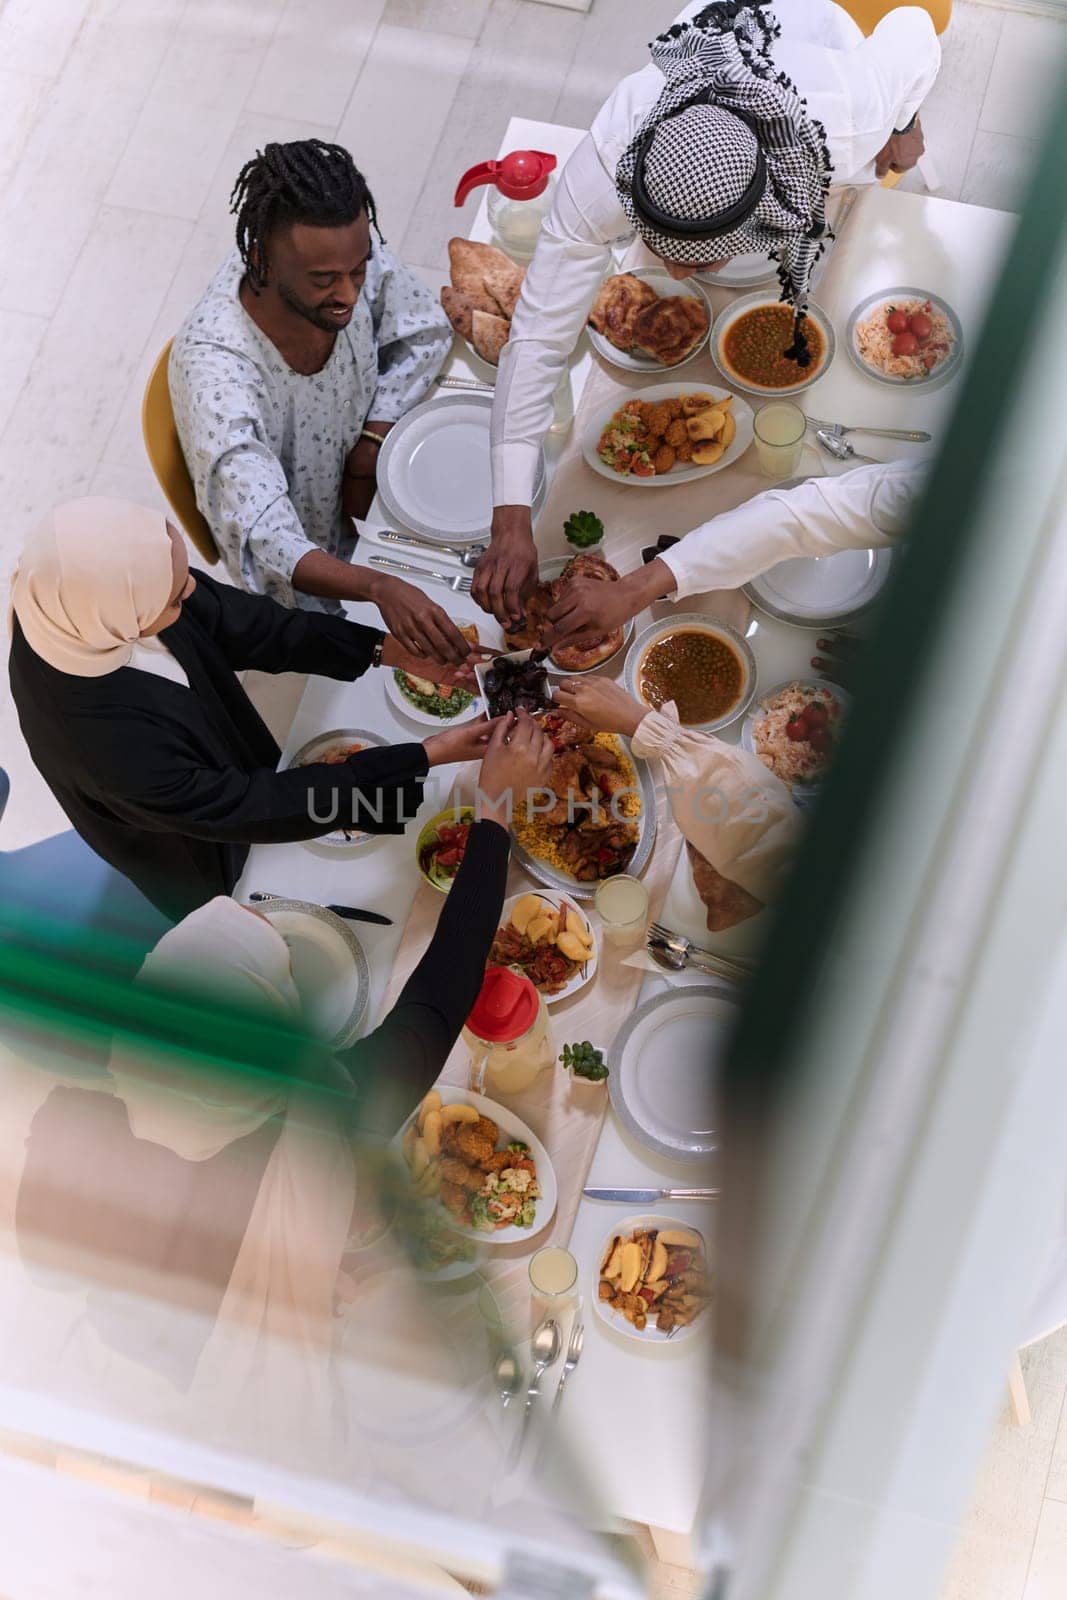 Top view of diverse hands of a Muslim family delicately grasp fresh dates, symbolizing the breaking of the fast during the holy month of Ramadan, capturing a moment of cultural unity, shared tradition, and the joyous anticipation of communal iftar.